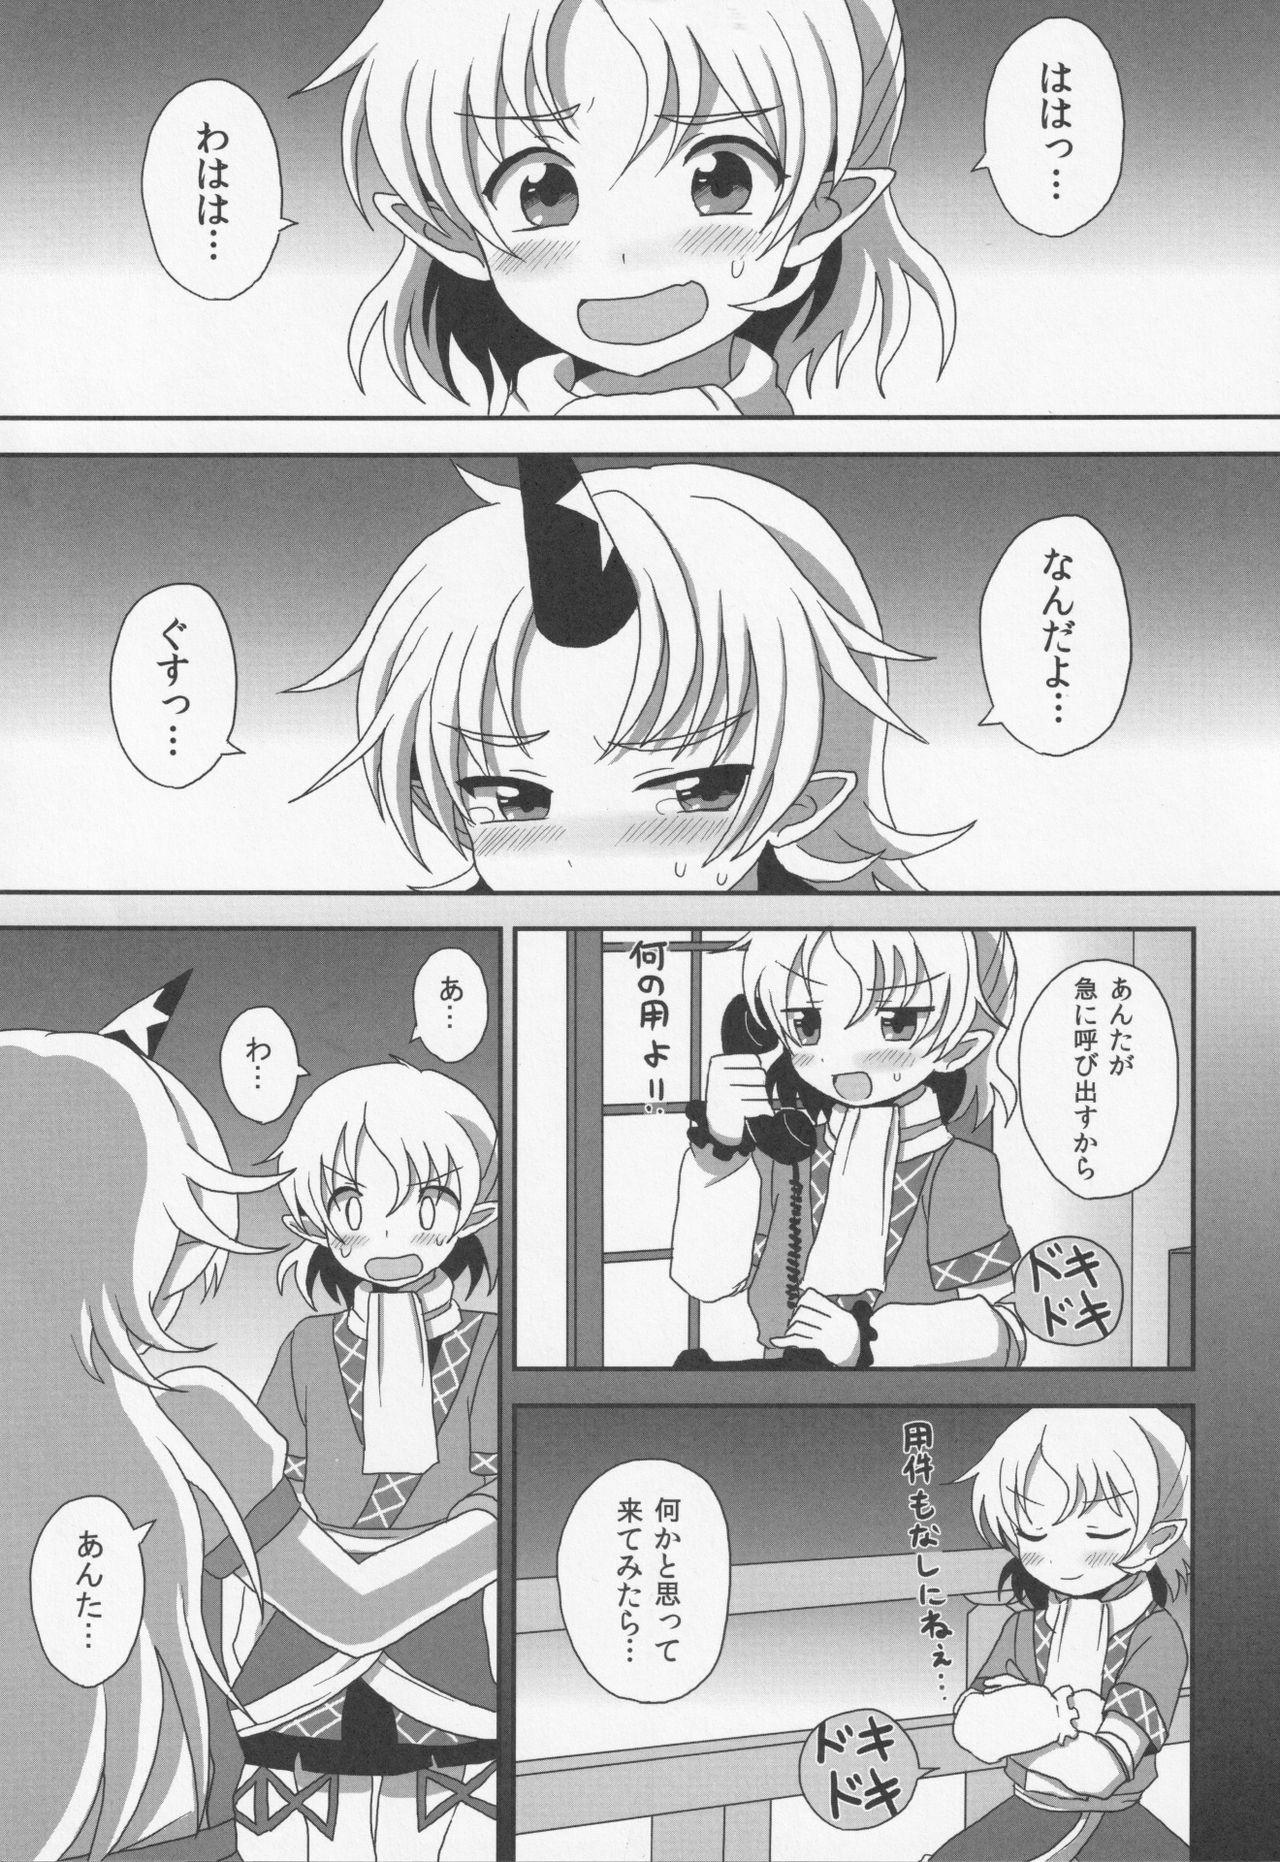 Special Locations (C80) [Bottle Syrup (Inaho)] -Kyuuto de Watashi to Tsukiatte- (Touhou Project) - Touhou project Buceta - Page 4